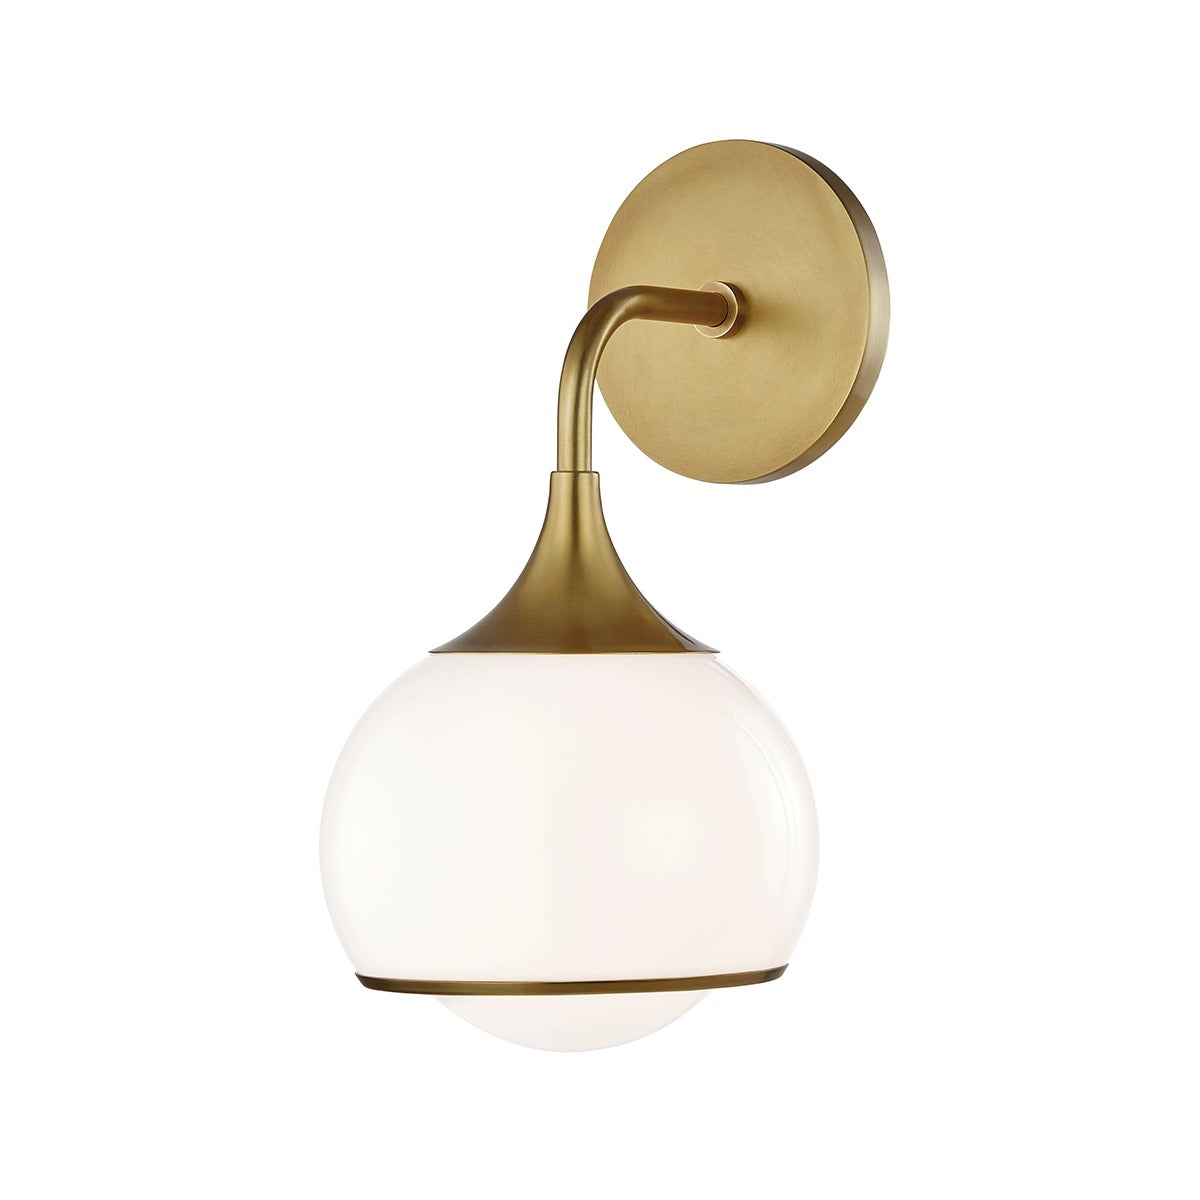 Mitzi, Reese Wall Sconce